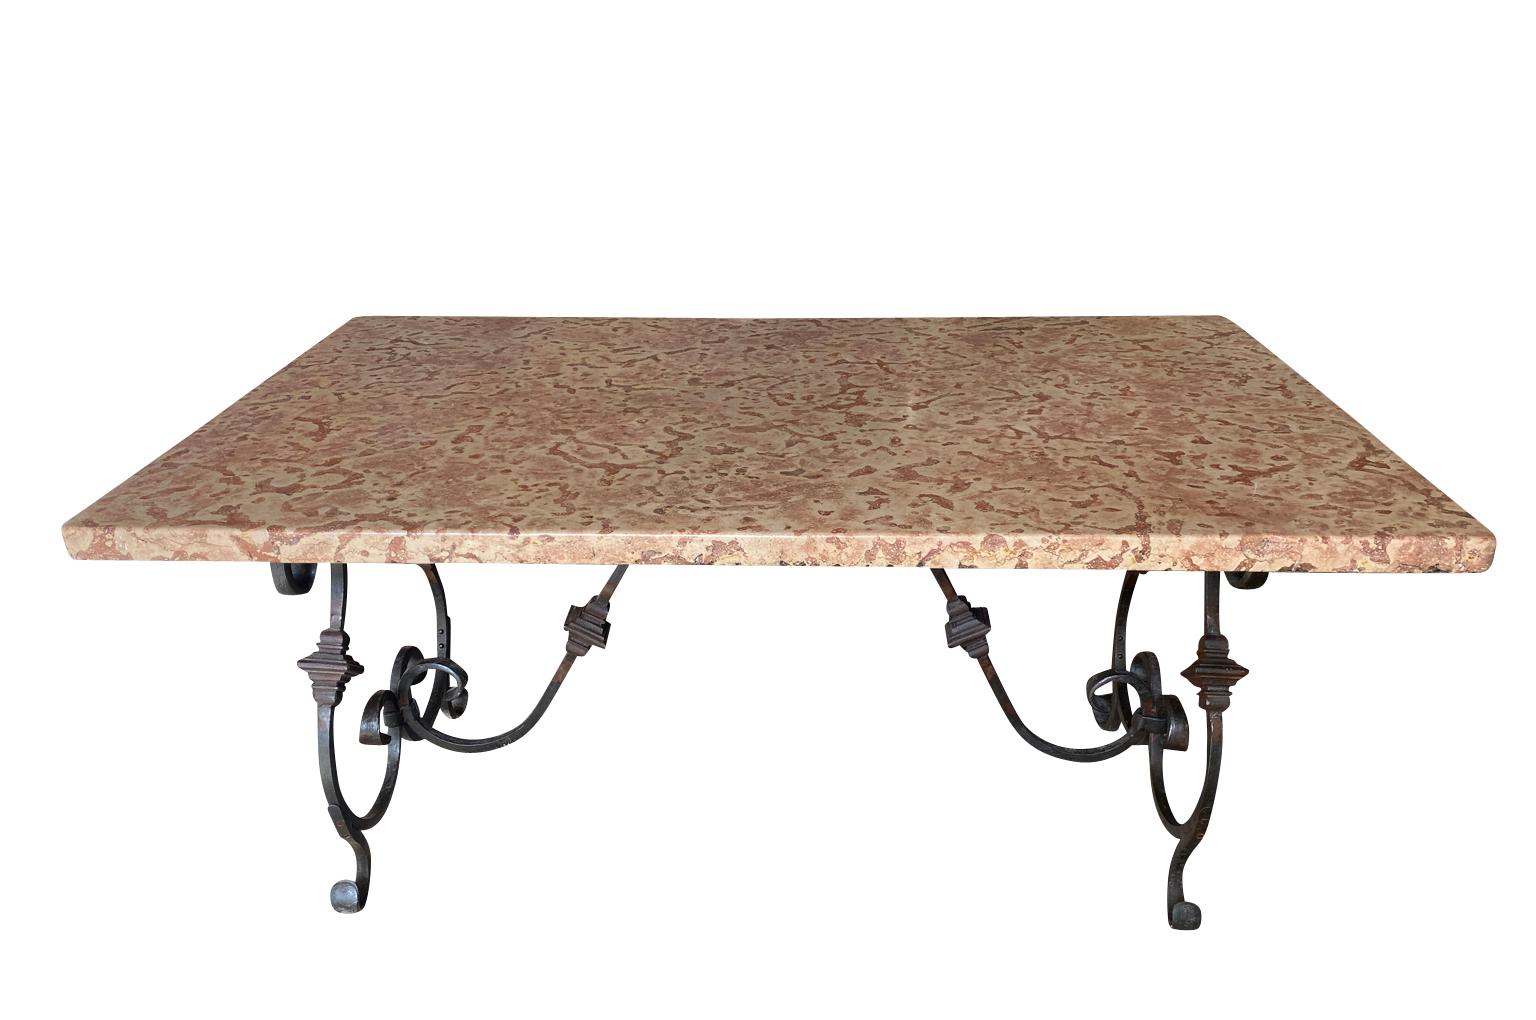 An outstanding Garden Dining Table from the Provence region of France.  Beautifully constructed with an exceptional marble top and a stunning iron base.  Perfect for any interior or garden.